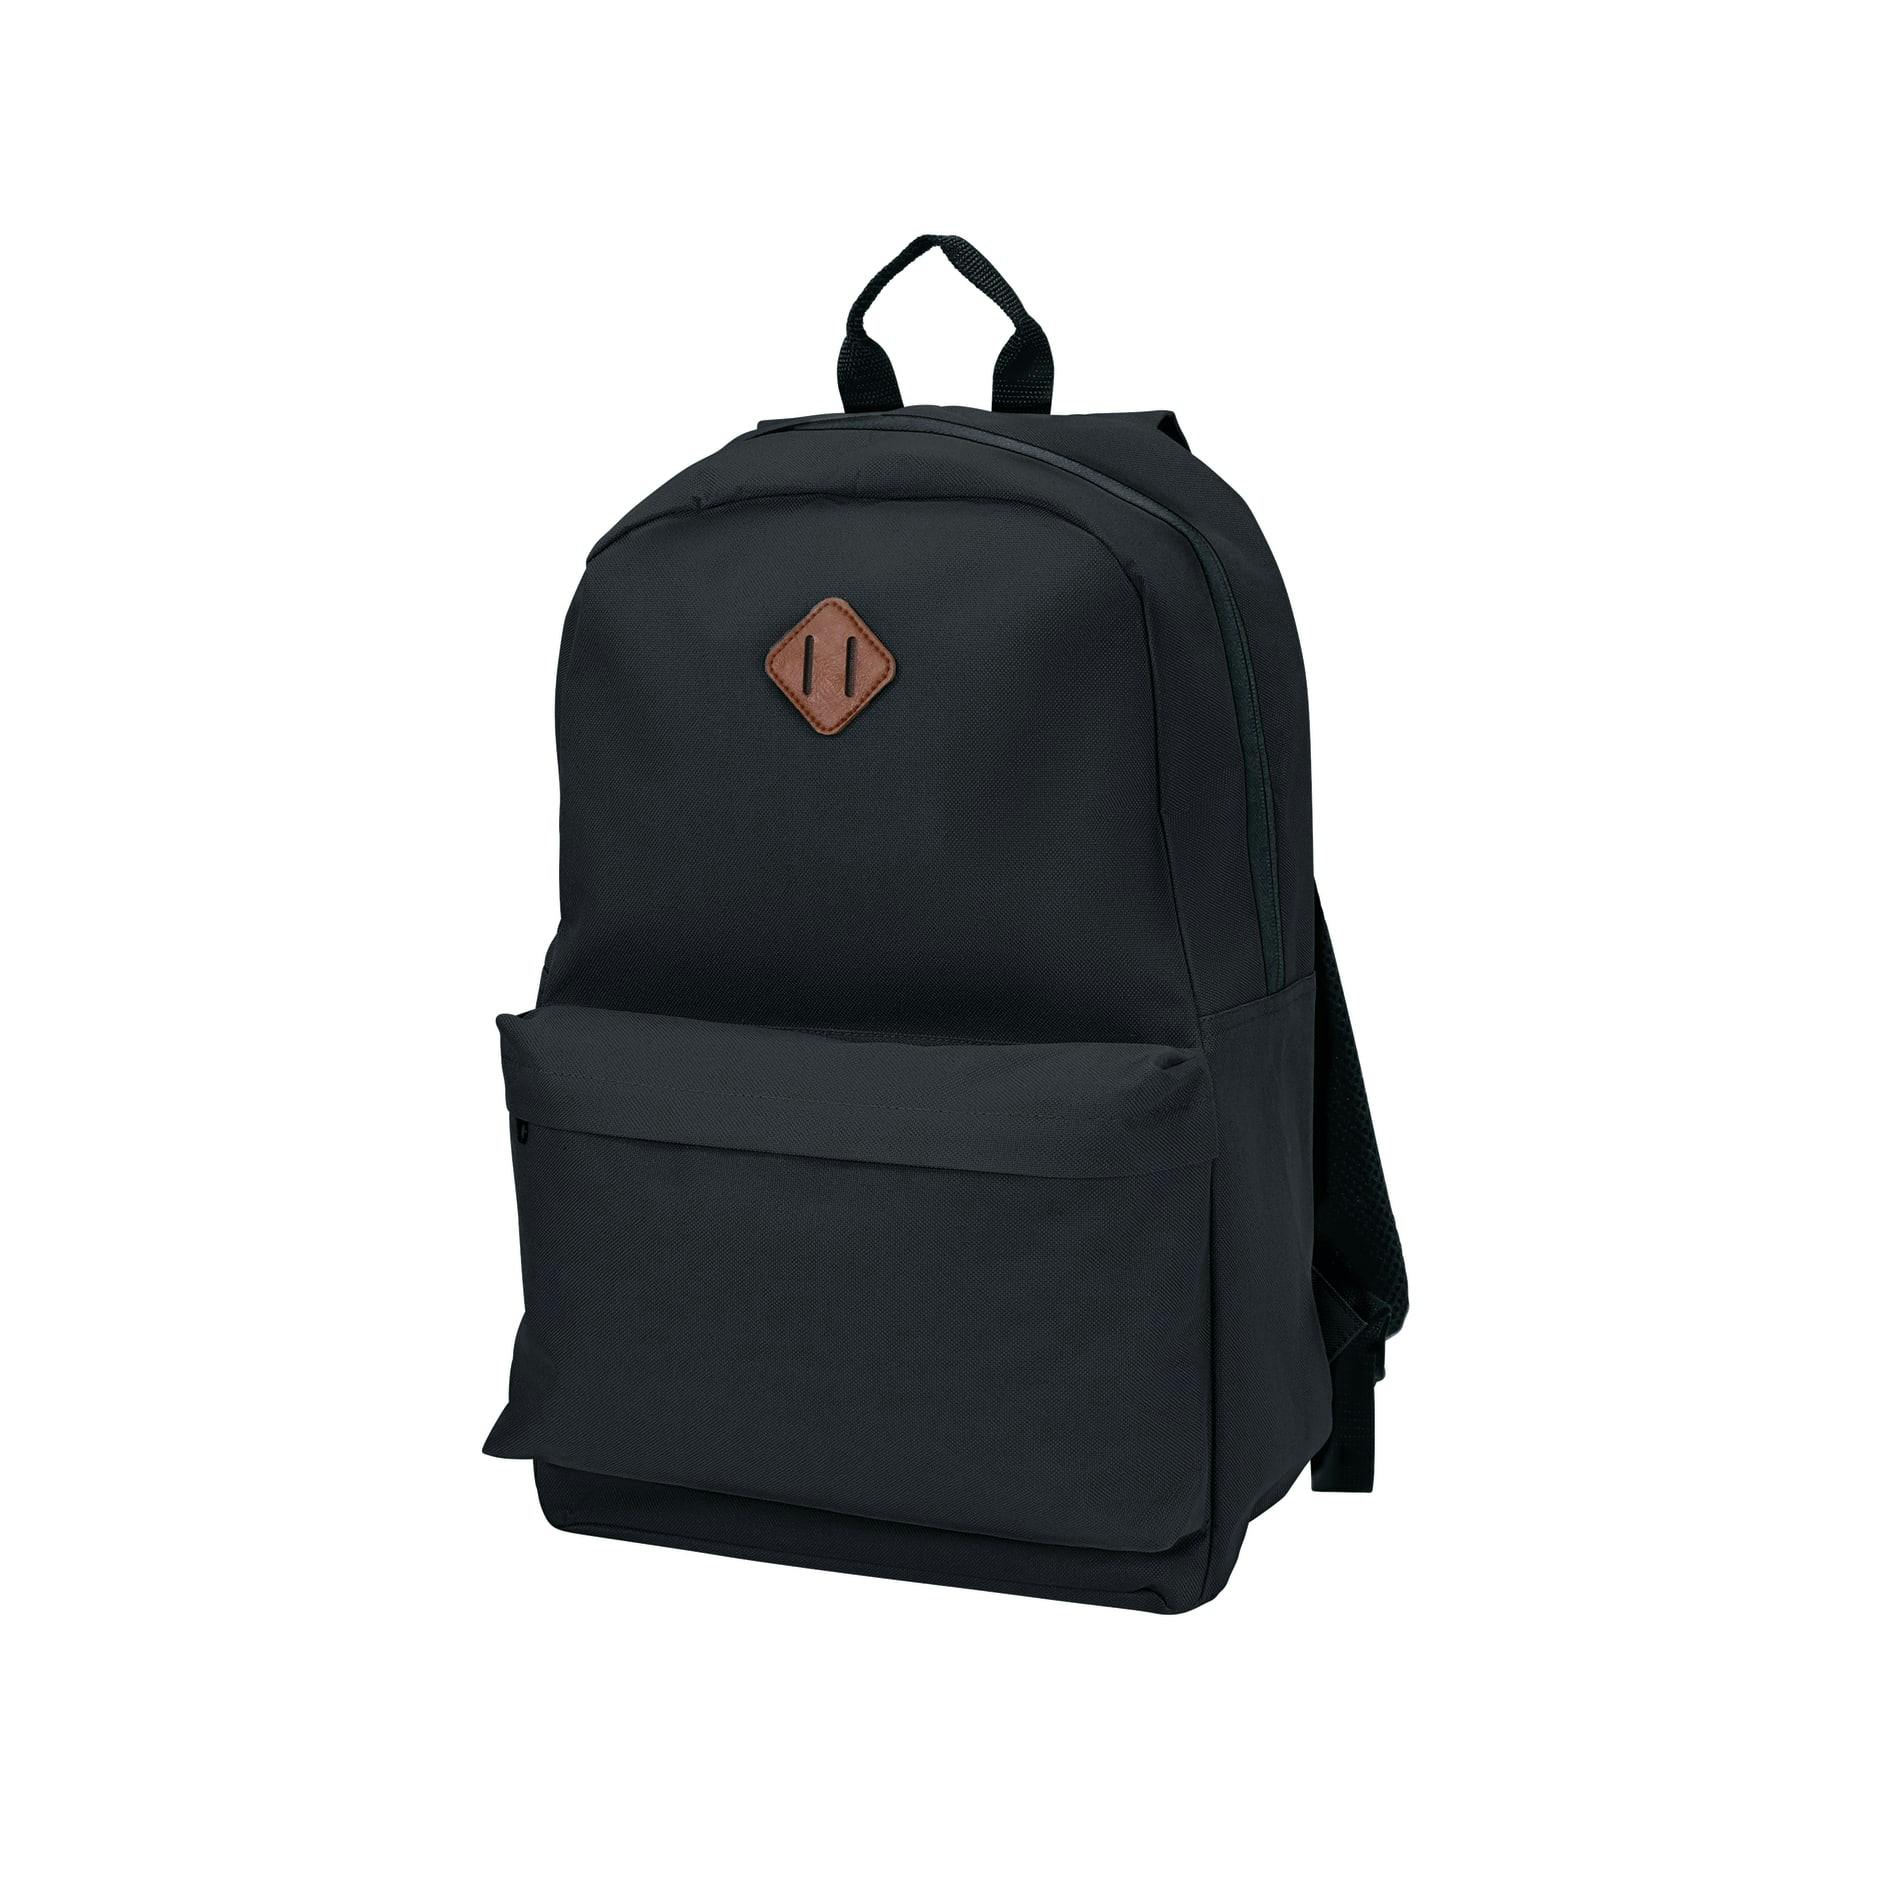 Stratta 15" Computer Backpack - additional Image 2